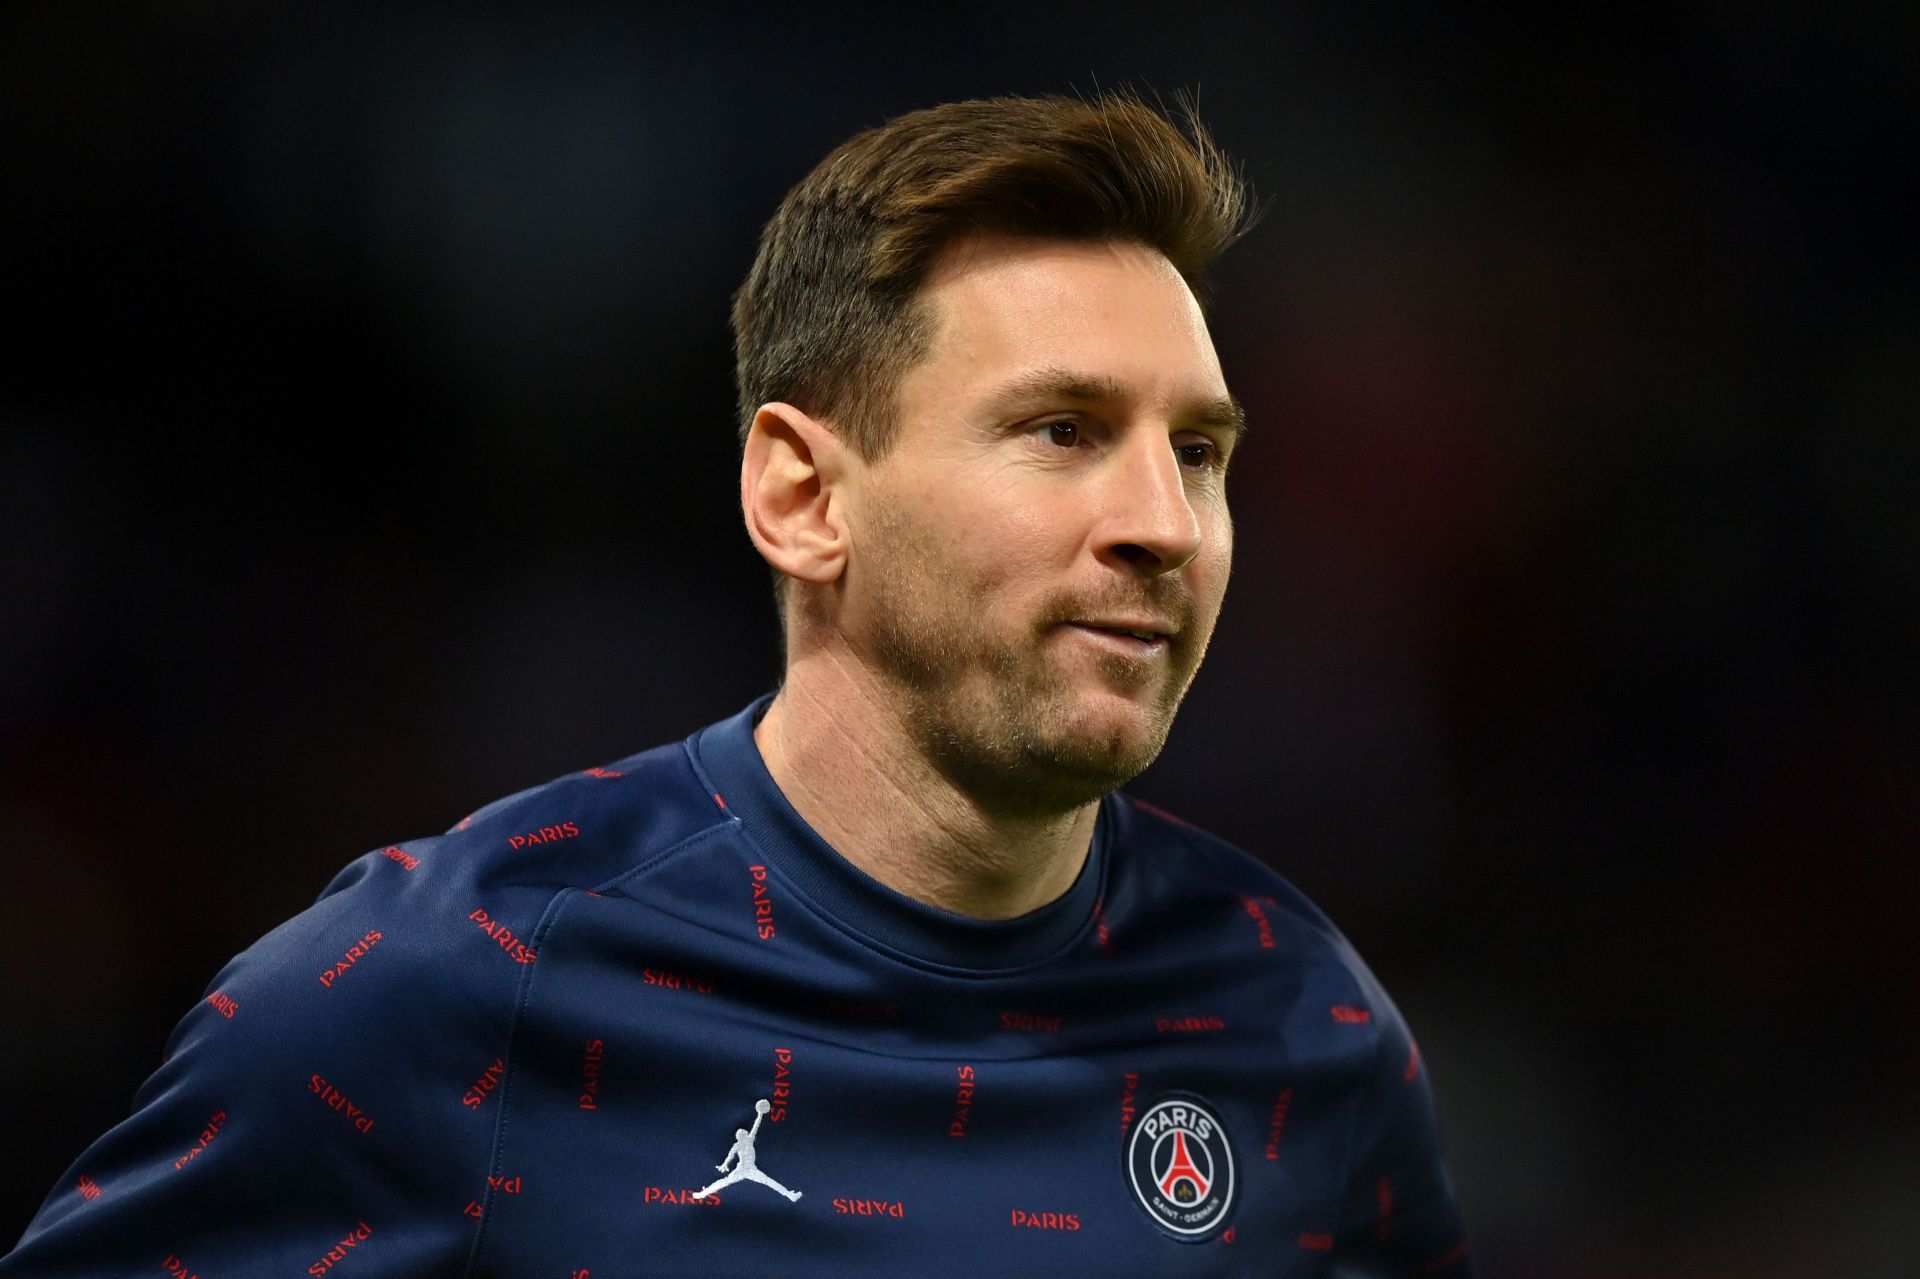 Lionel Messi has fully adapted to life at PSG, the Argentinean has revealed.